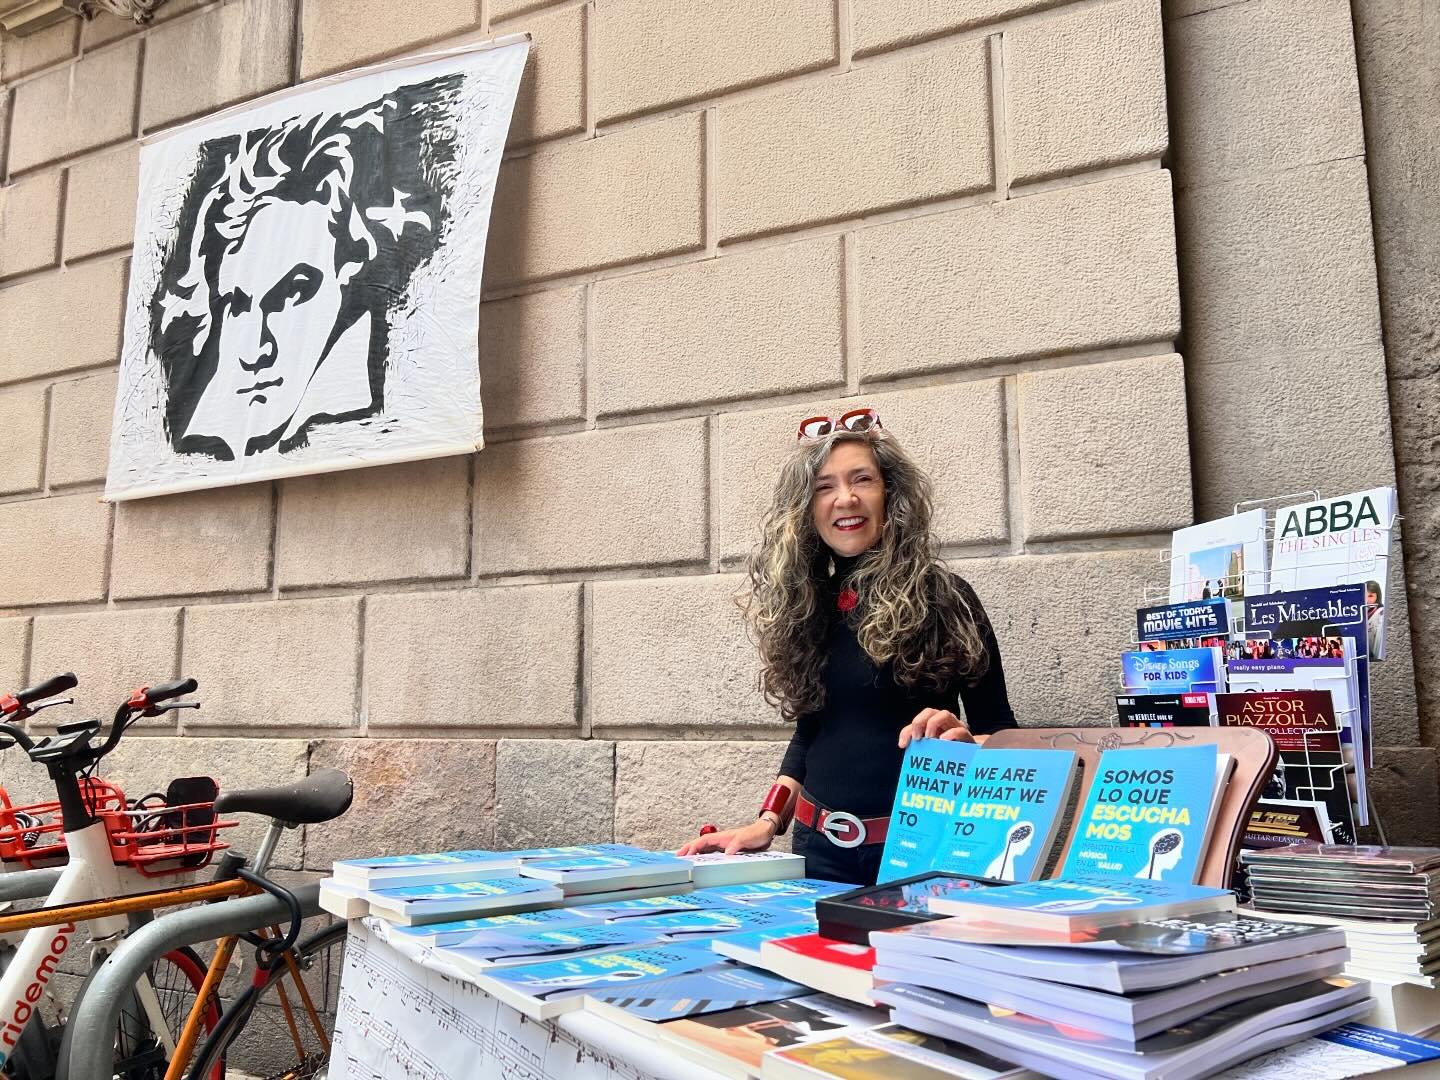 I had the most beautiful day of #santjordi celebrating books 📕 and friendship in beautiful #barcelona